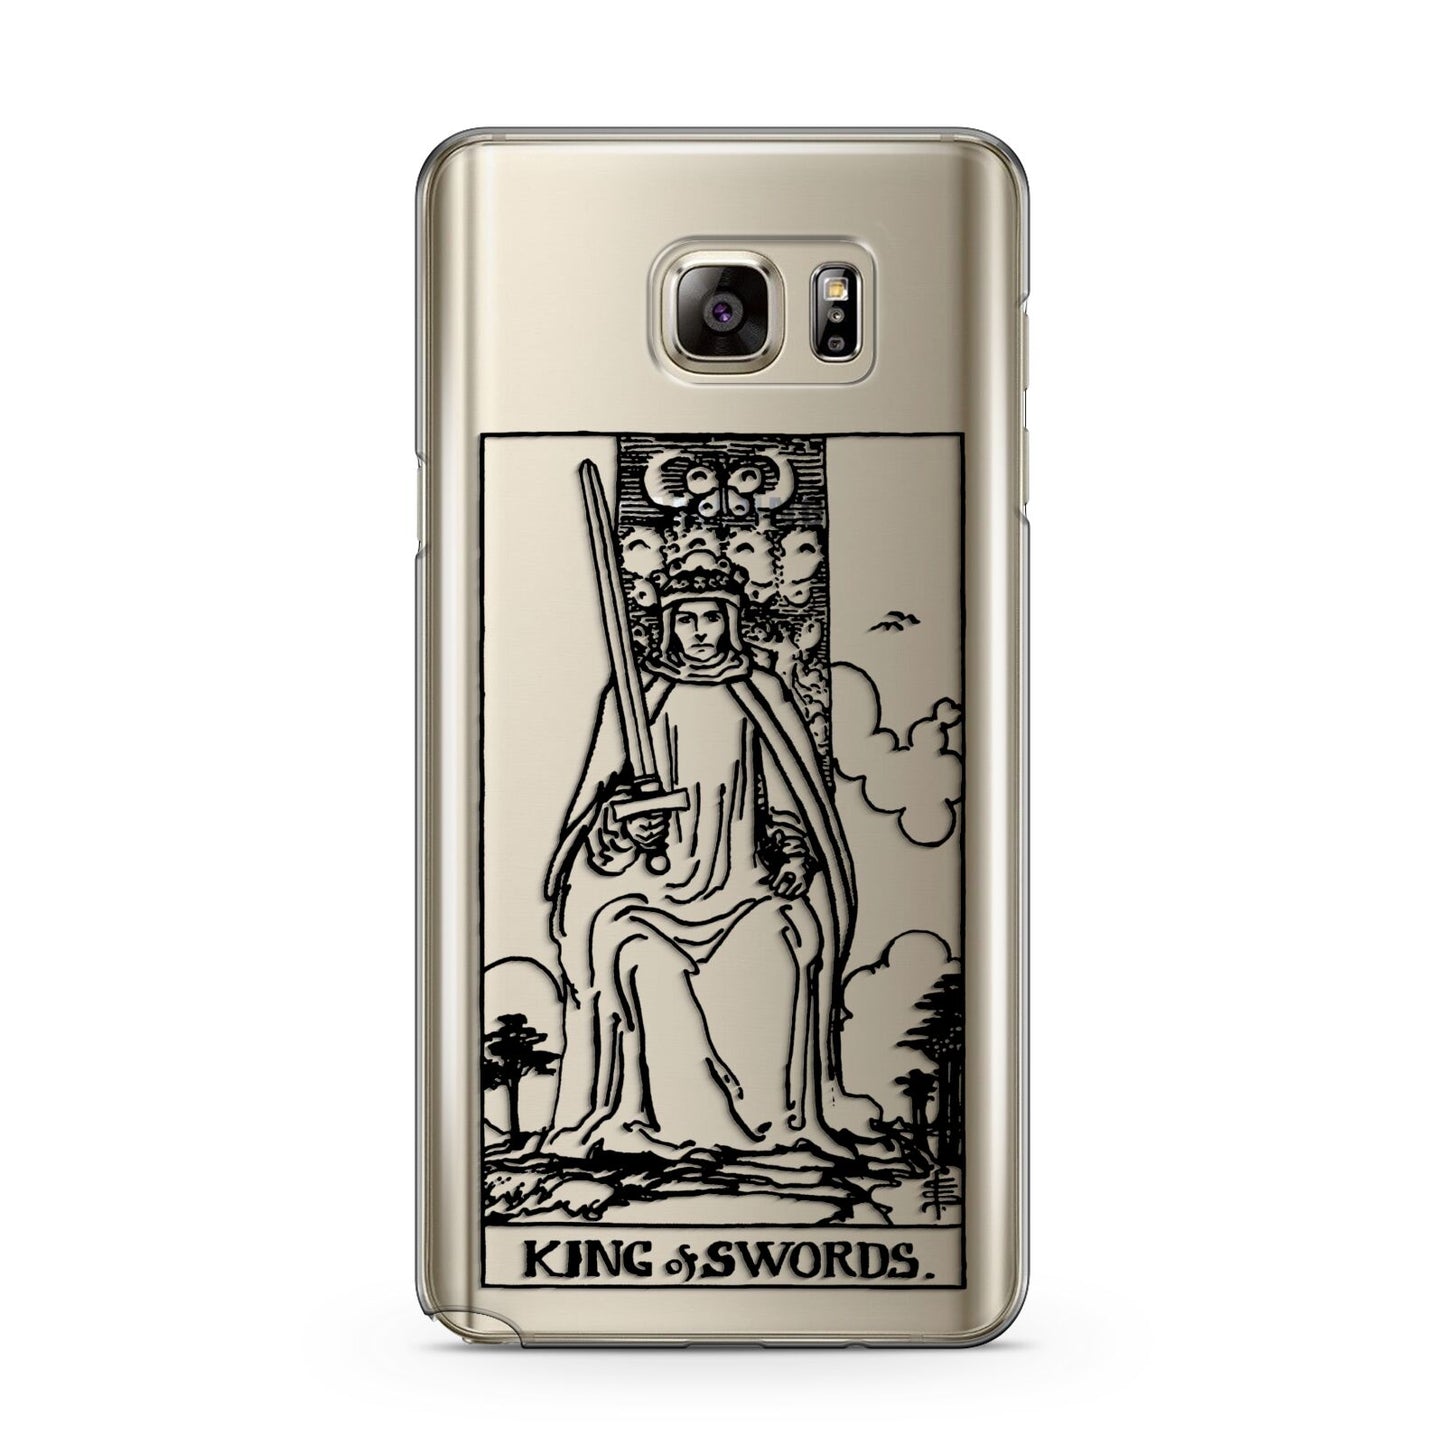 King of Swords Monochrome Samsung Galaxy Note 5 Case